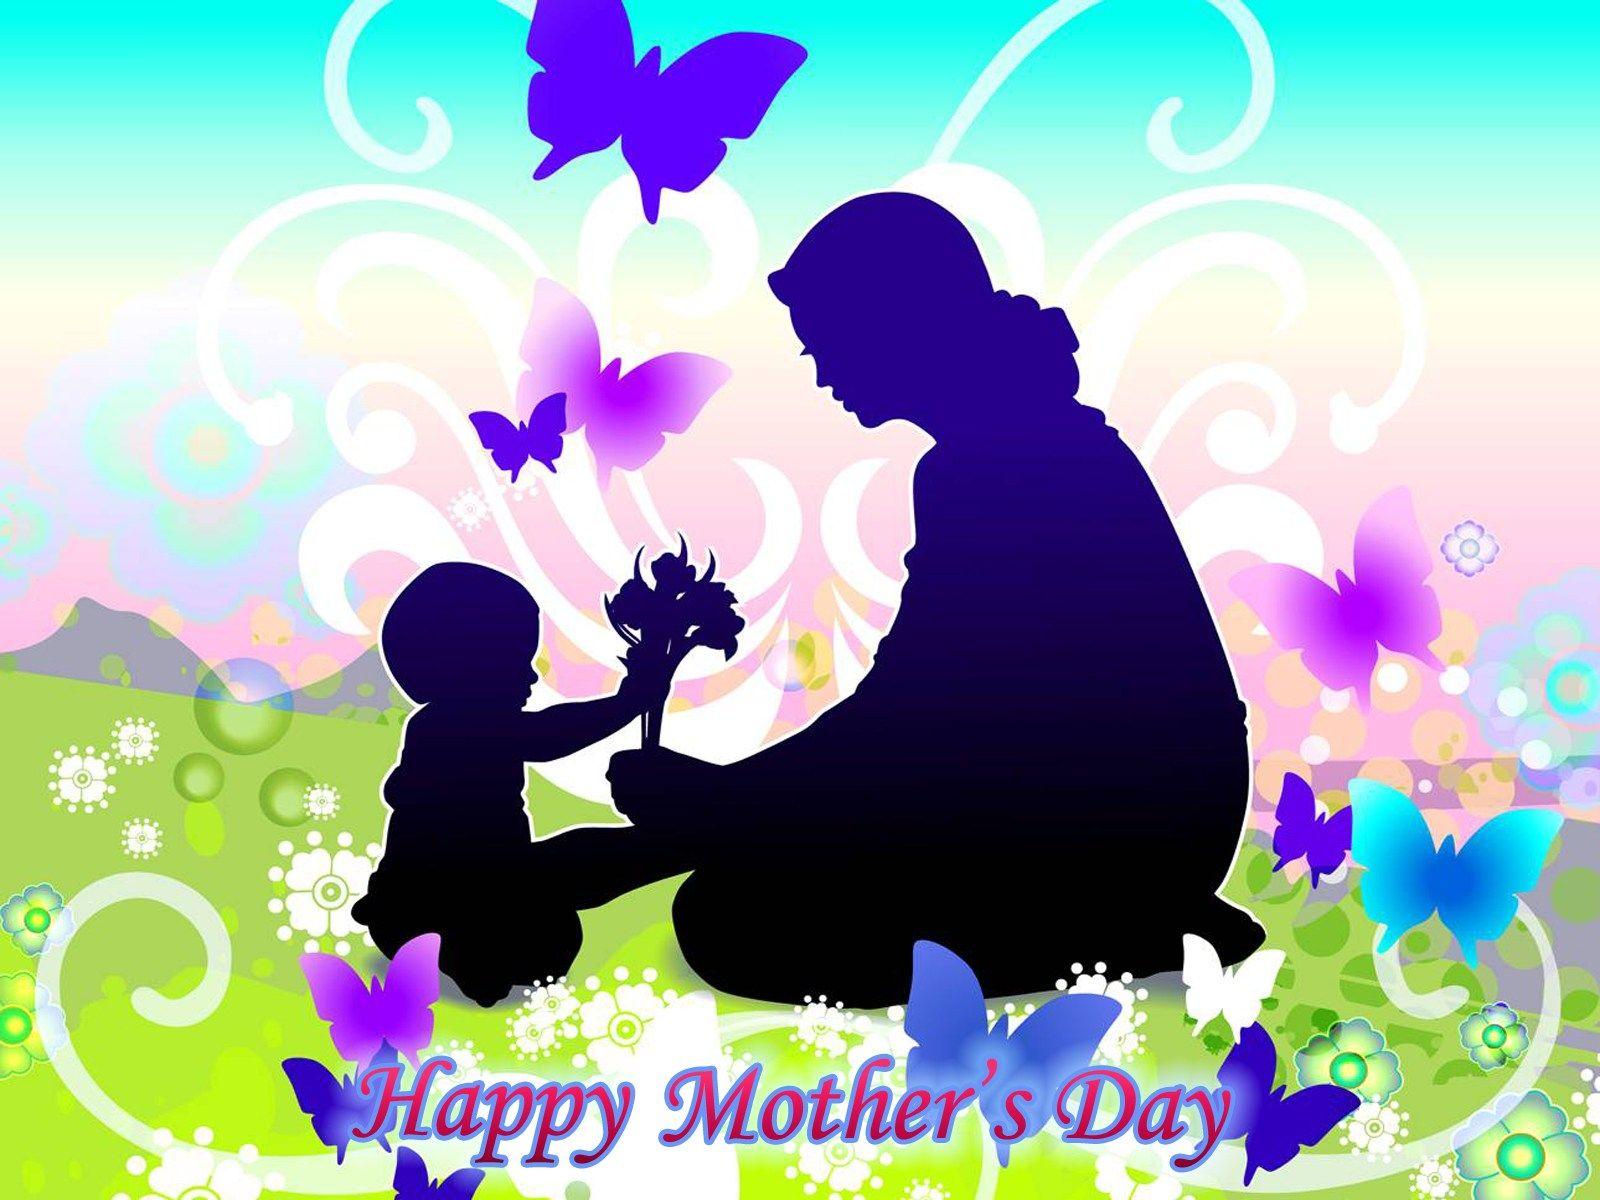 Happy Mothers Day Wallpaper 2018 and HD Image